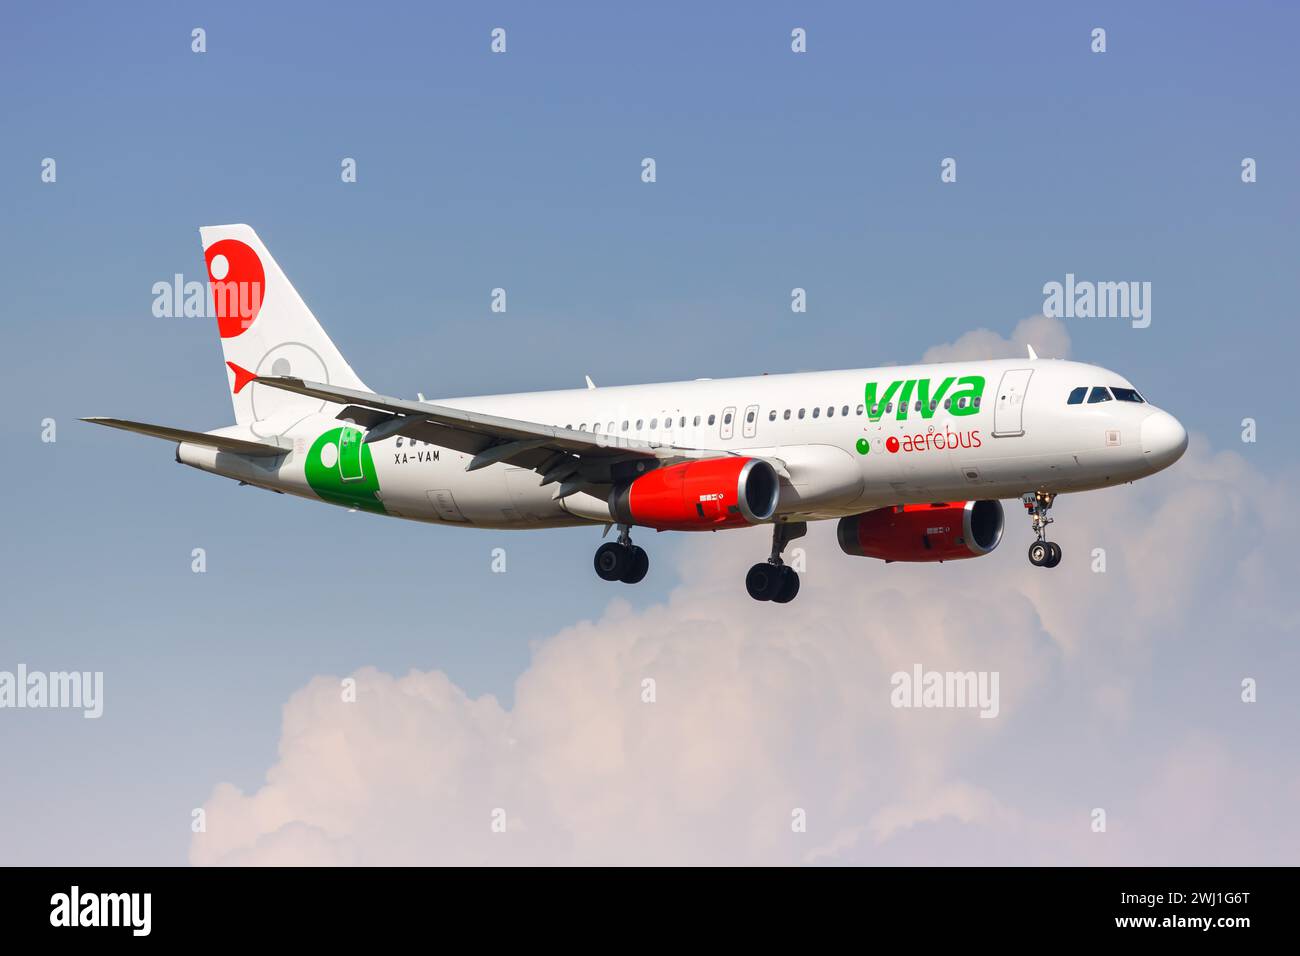 Viva Aerobus Airbus A320 aircraft Dallas Fort Worth Airport in the USA Stock Photo